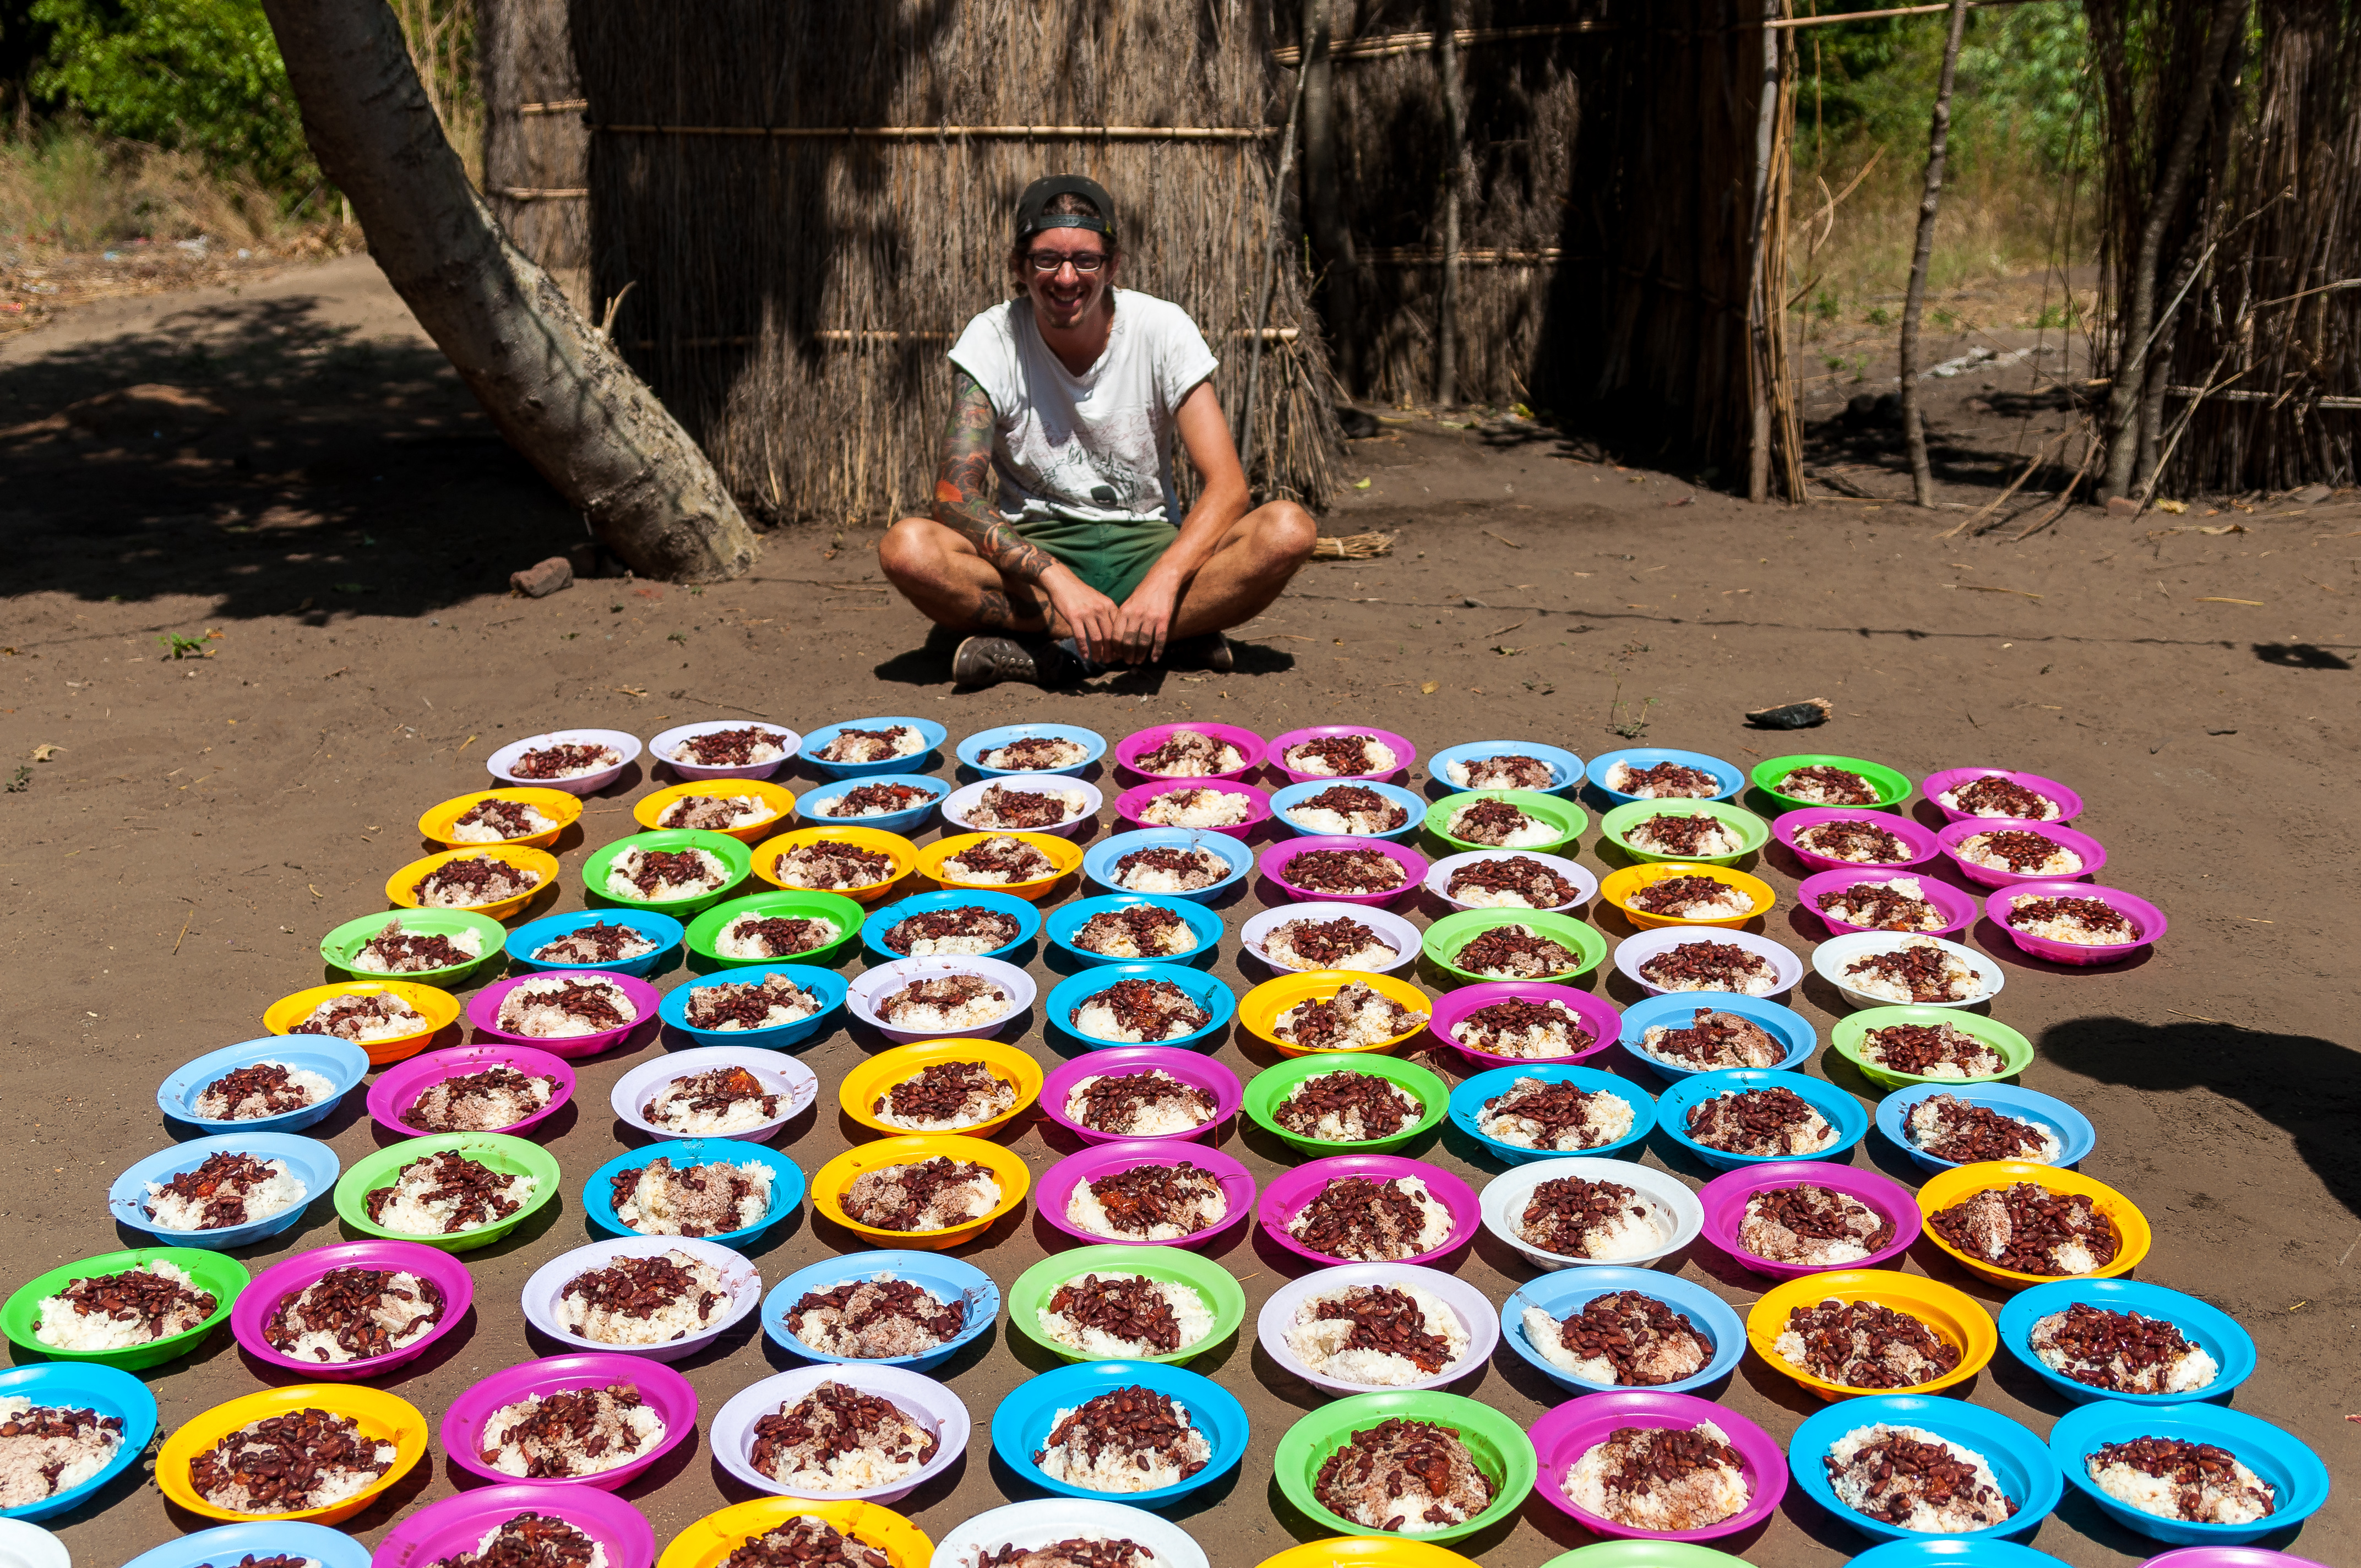 Marvin sits proudly with the 100+ carefully arranged plates of rice and beans.